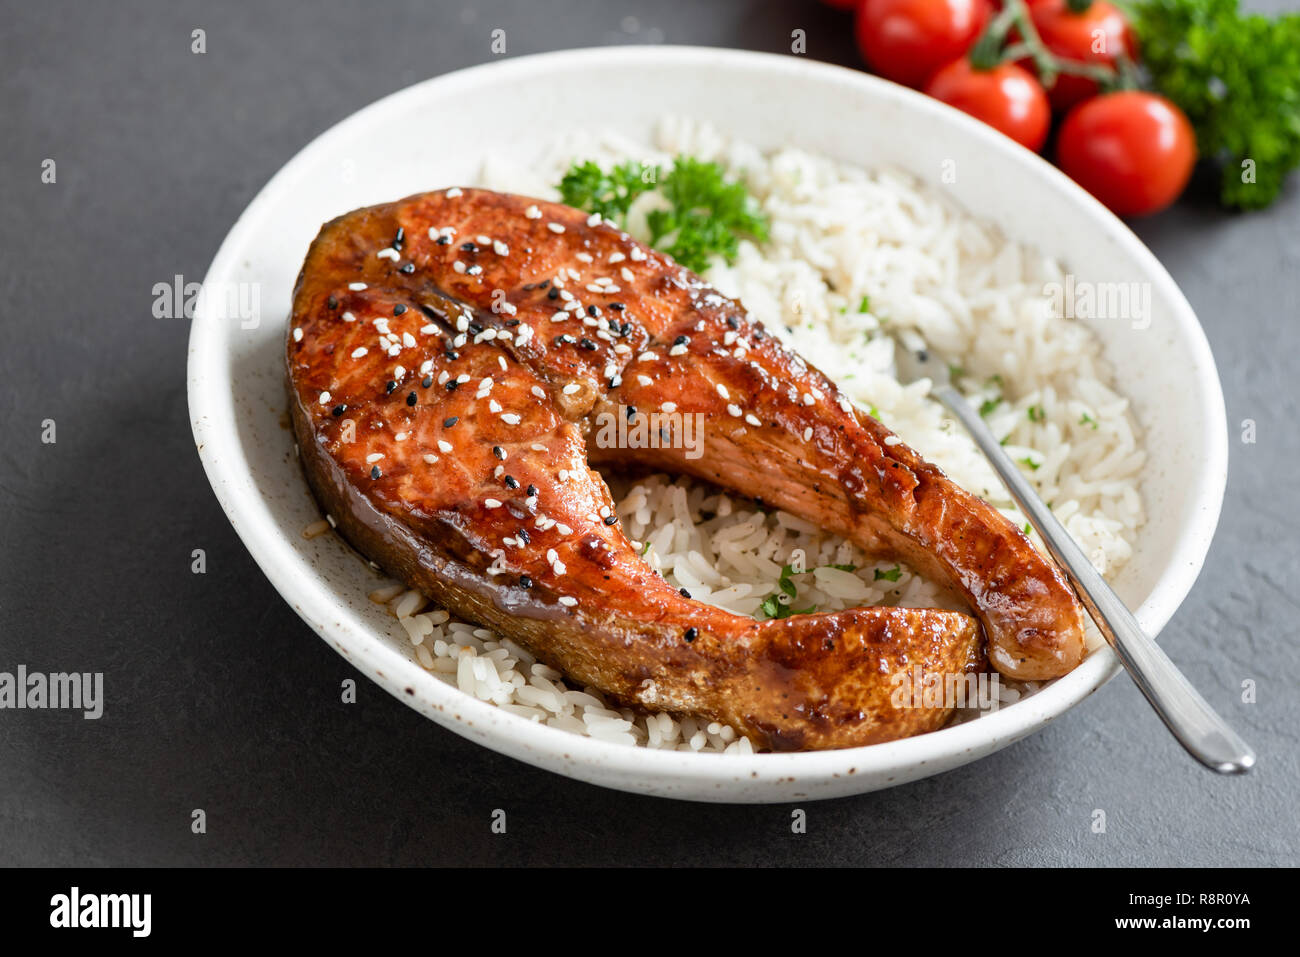 Grilled salmon steak with teriyaki sauce and white rice on a plate. Tasty dinner Stock Photo